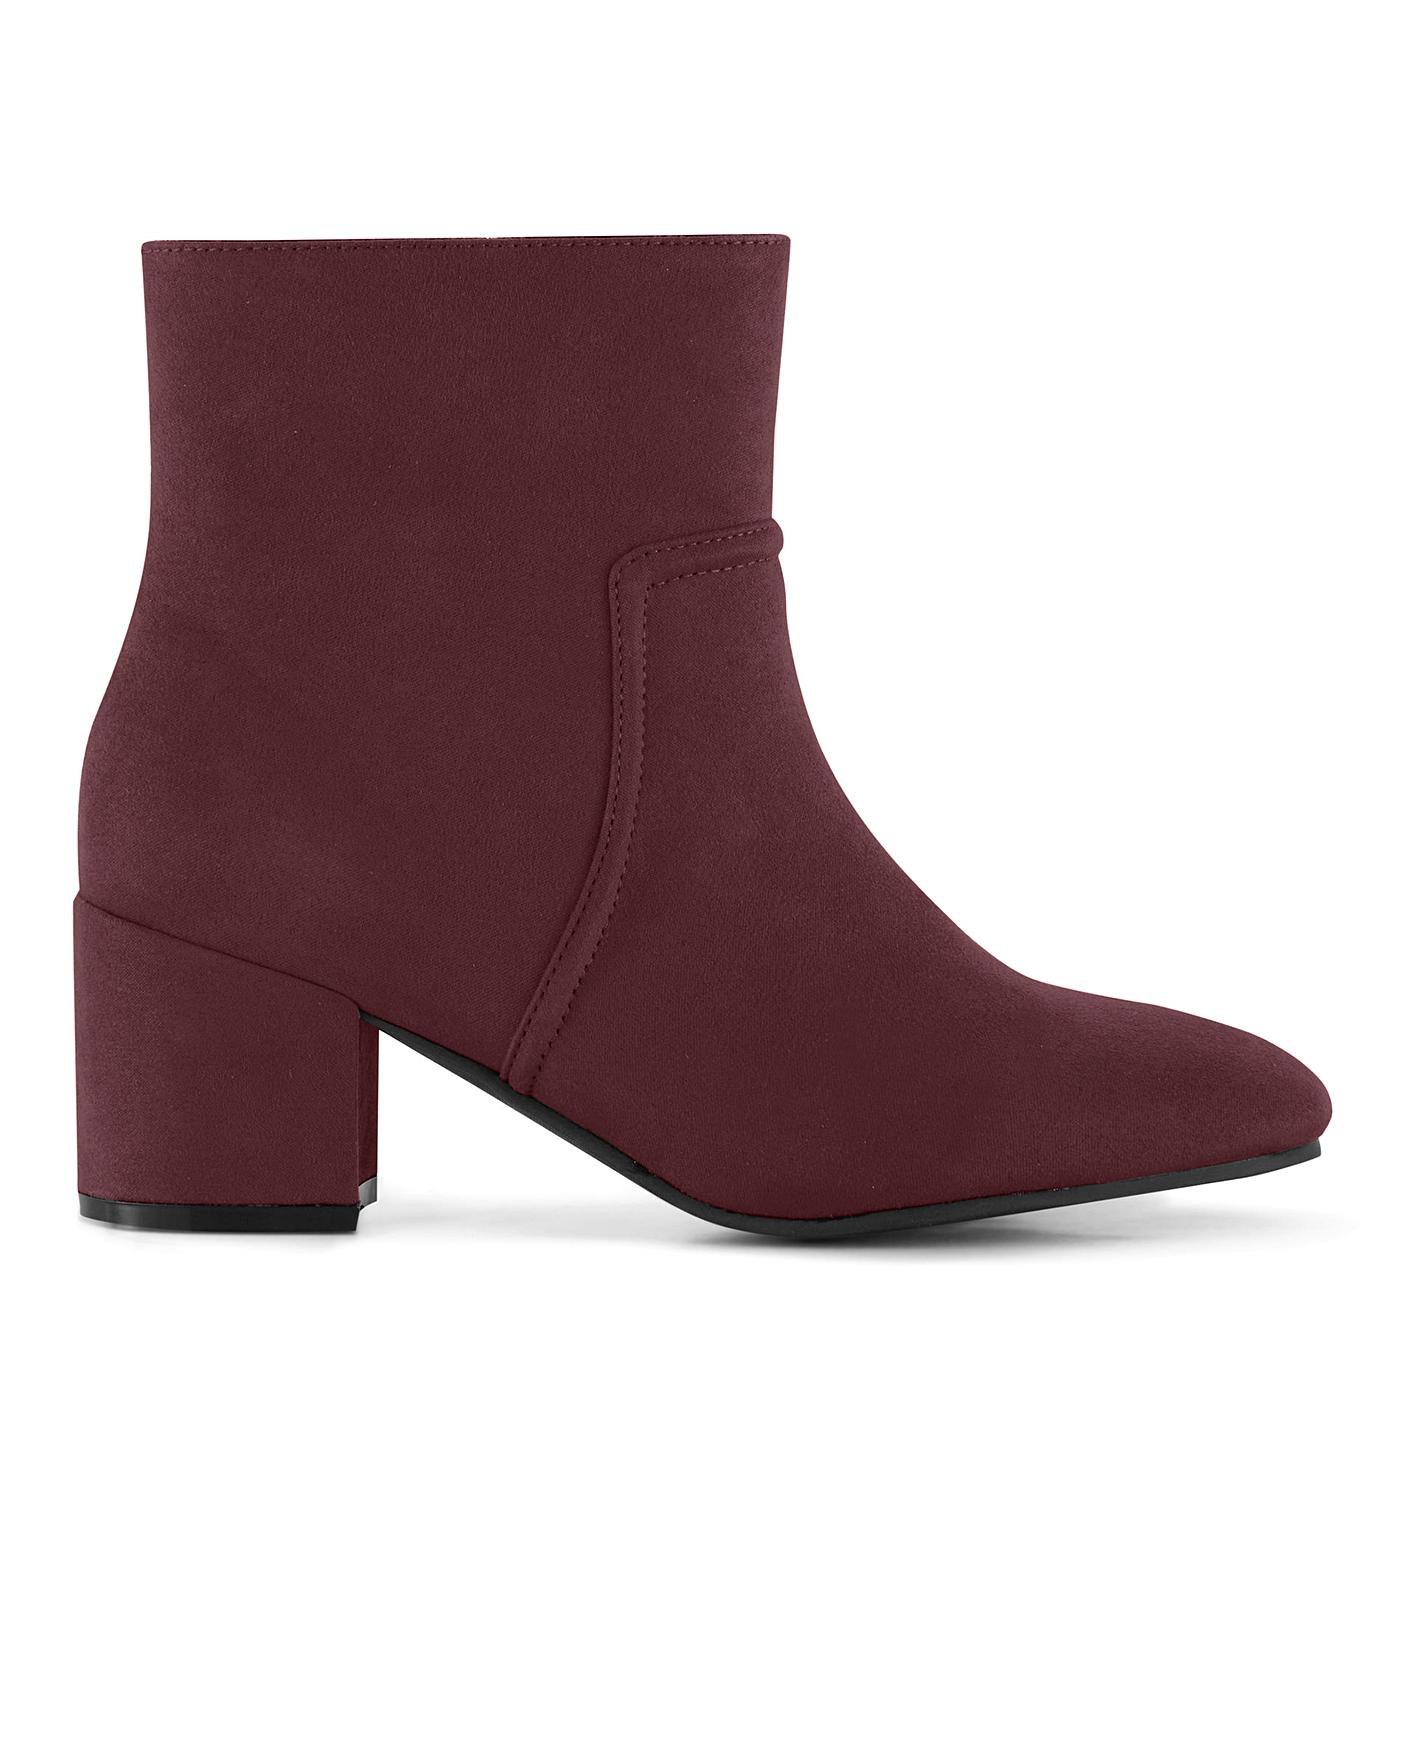 jd williams ladies ankle boots